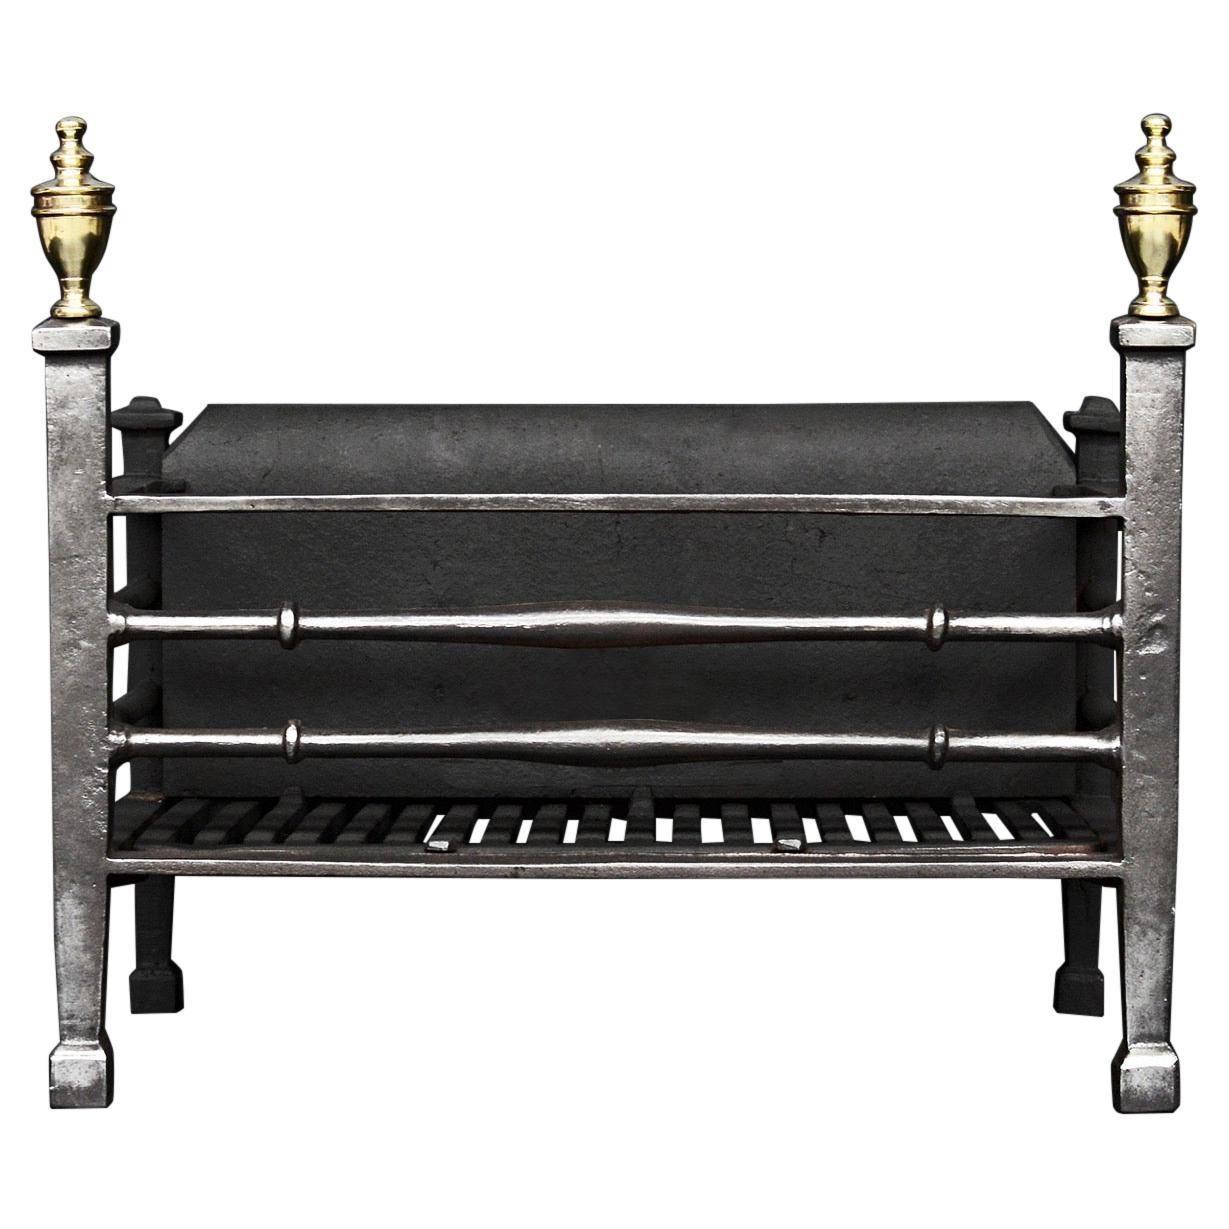 Simple Polished Steel Firegrate For Sale